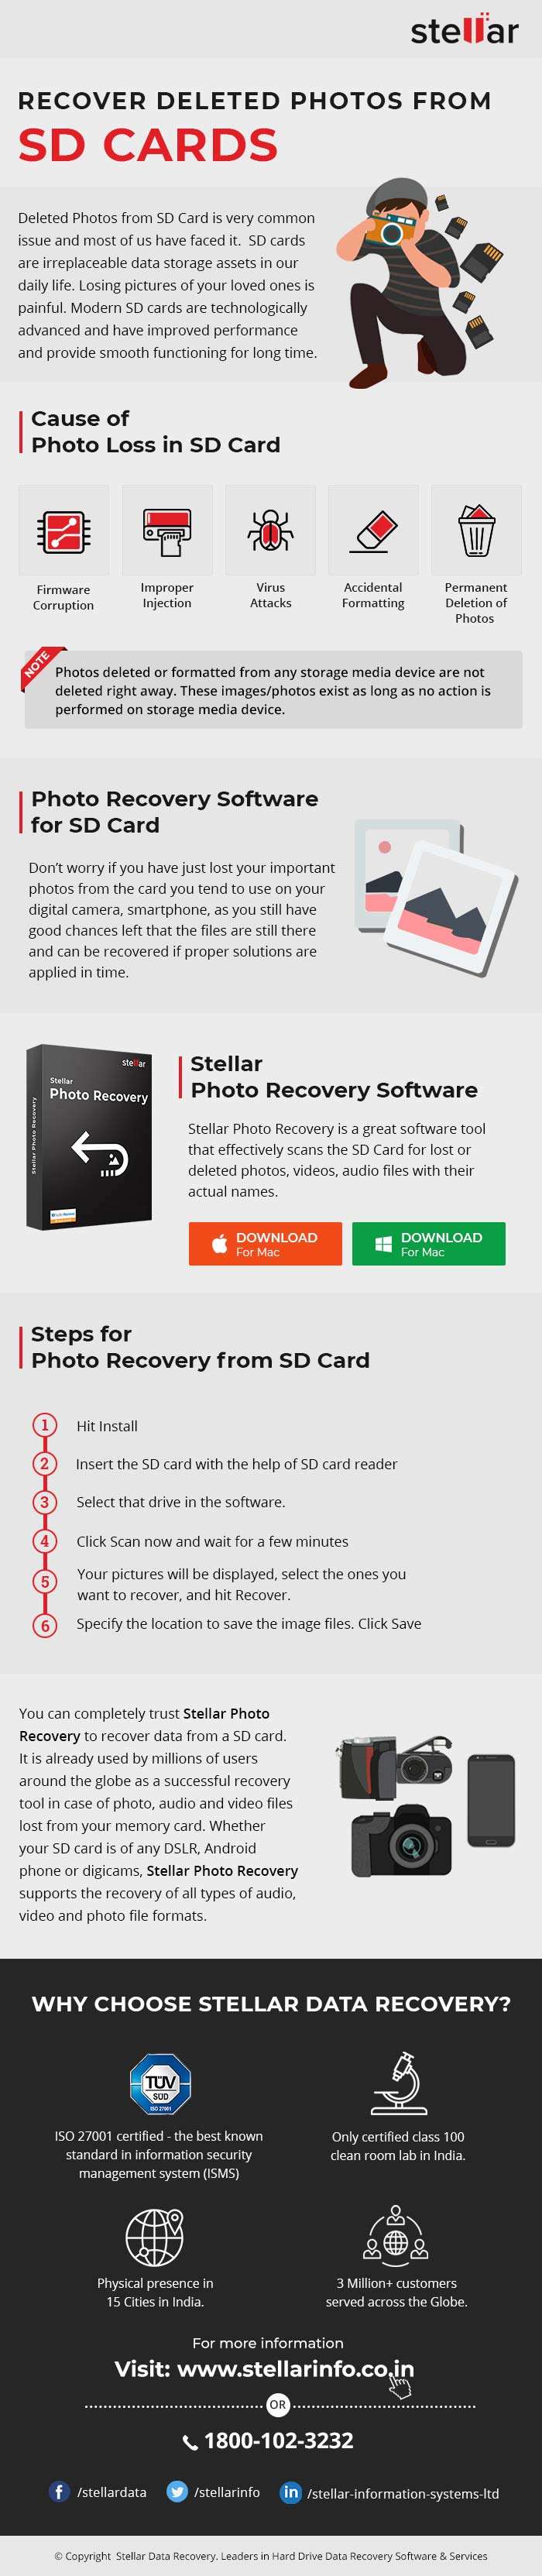 How to Recover Deleted Photos from SD Cards?